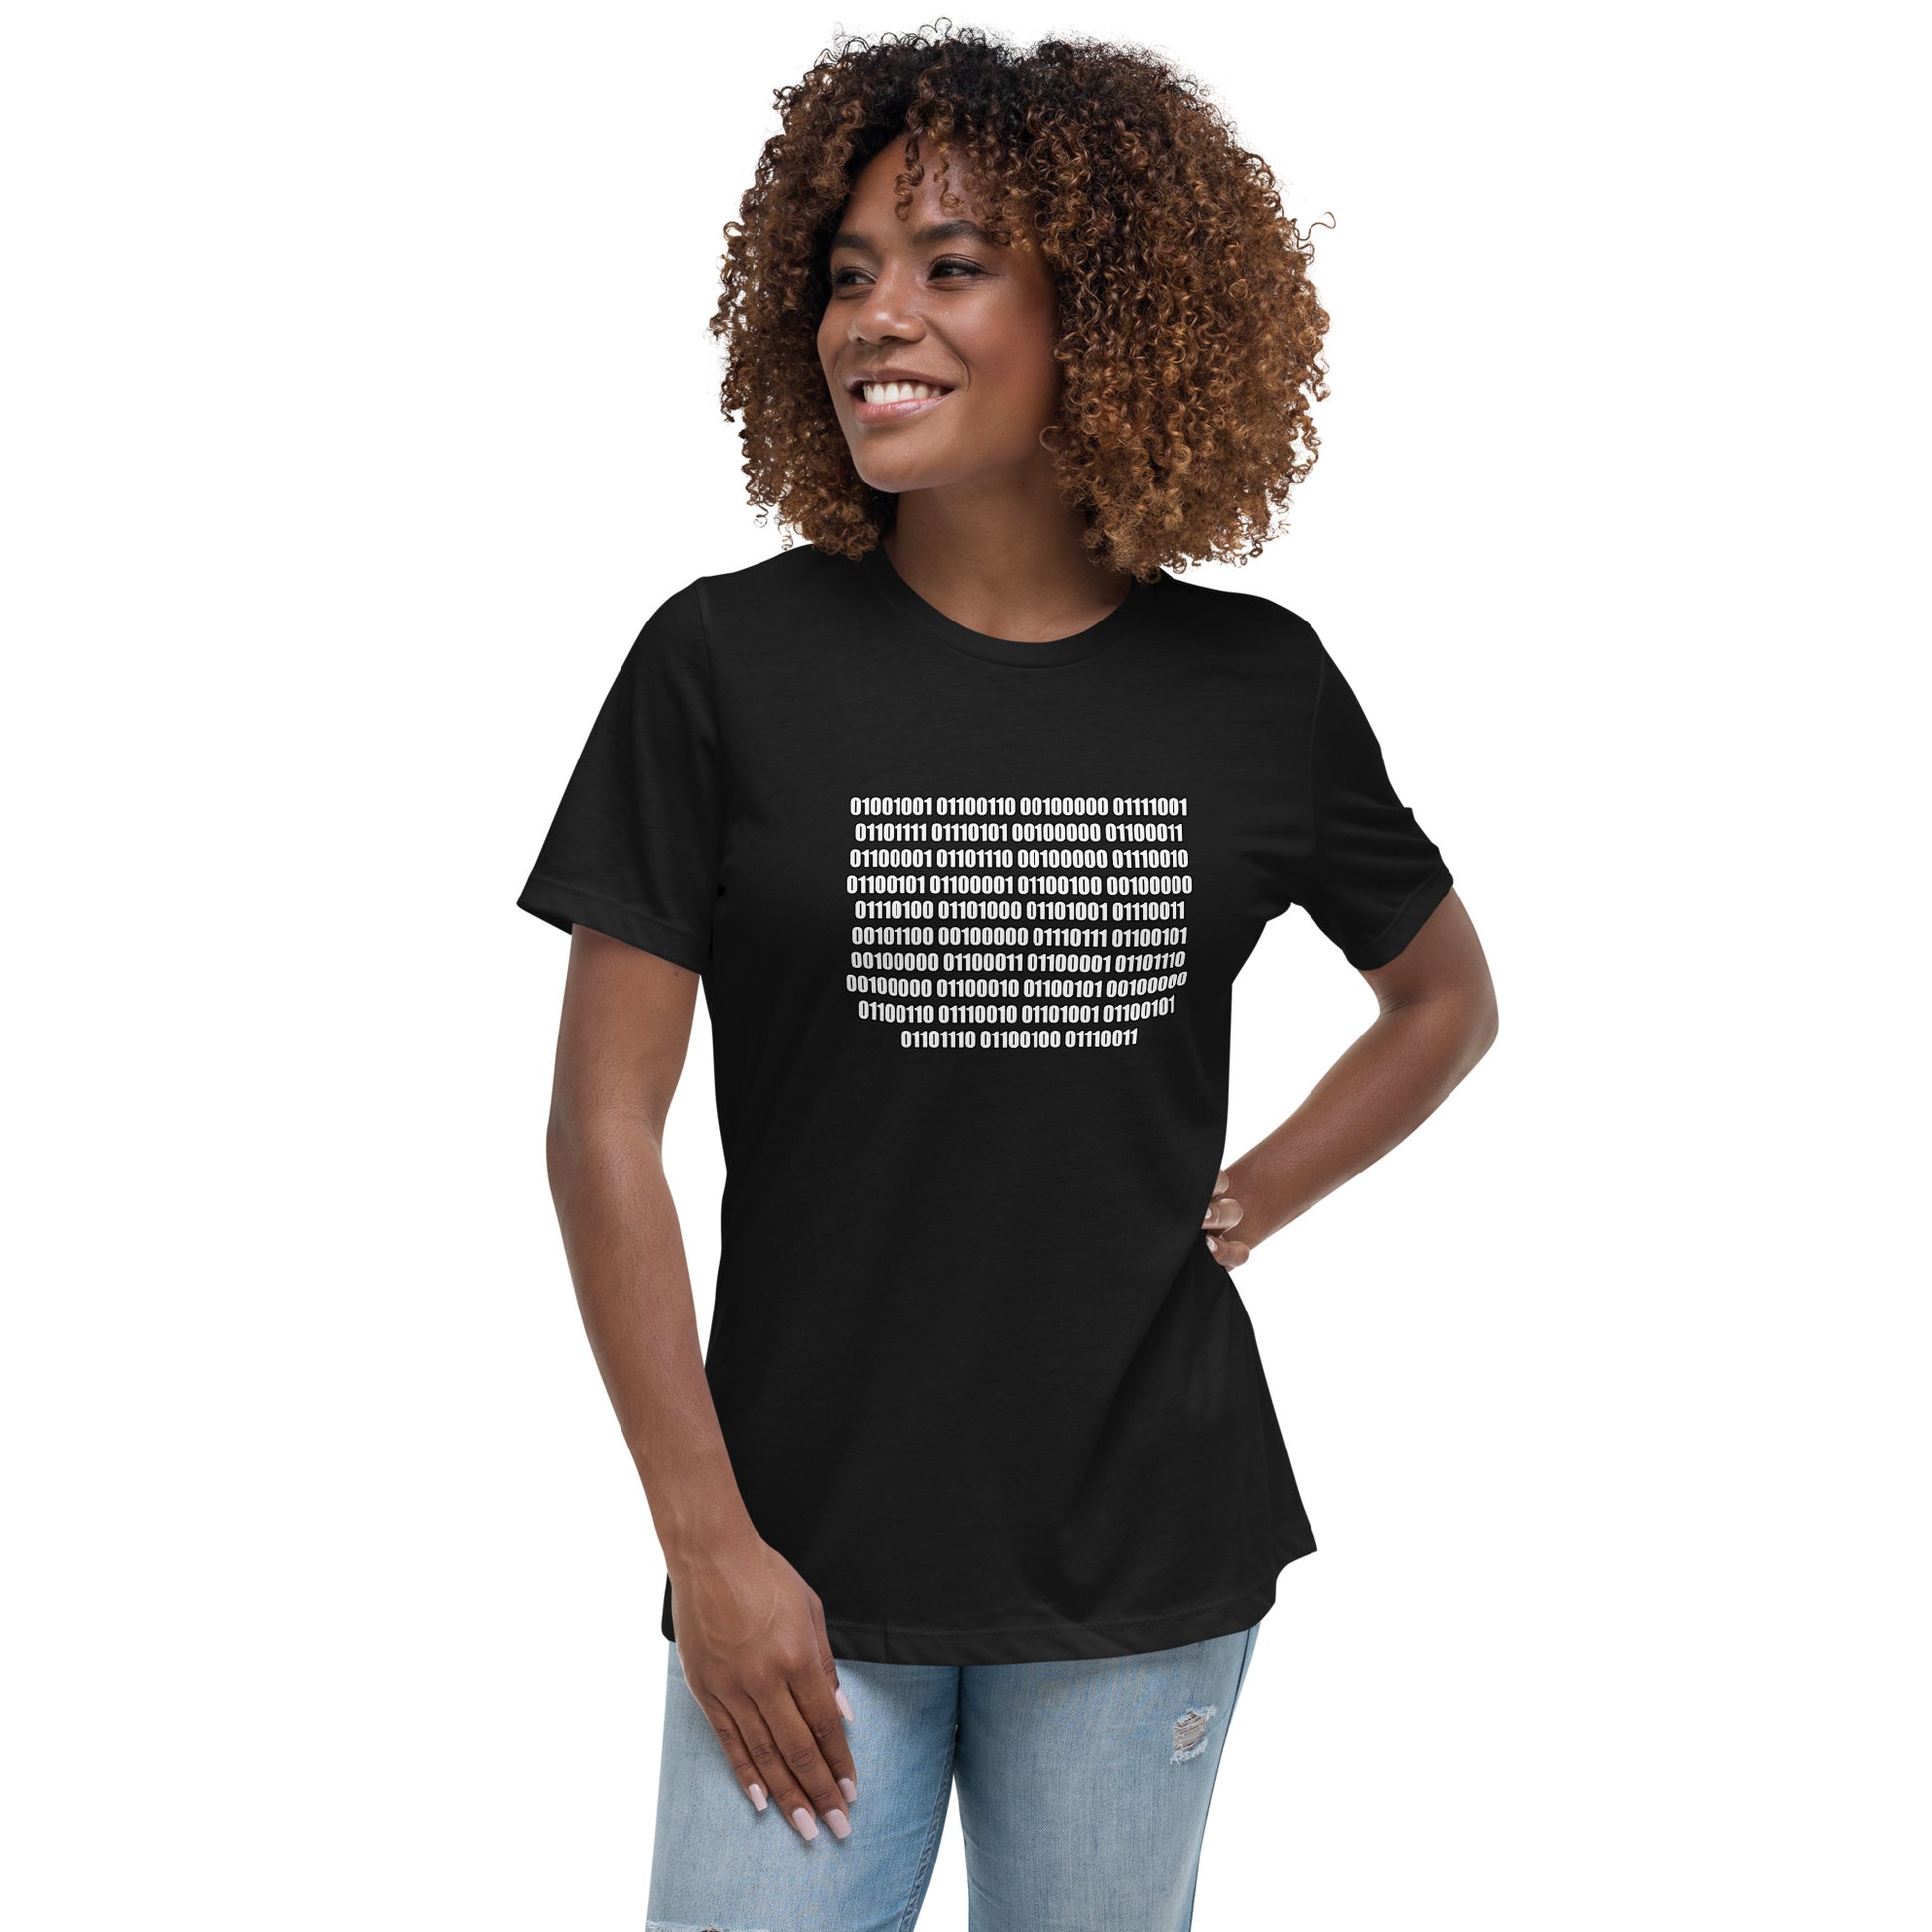 Woman with black t-shirt with binary code "If you can read this"